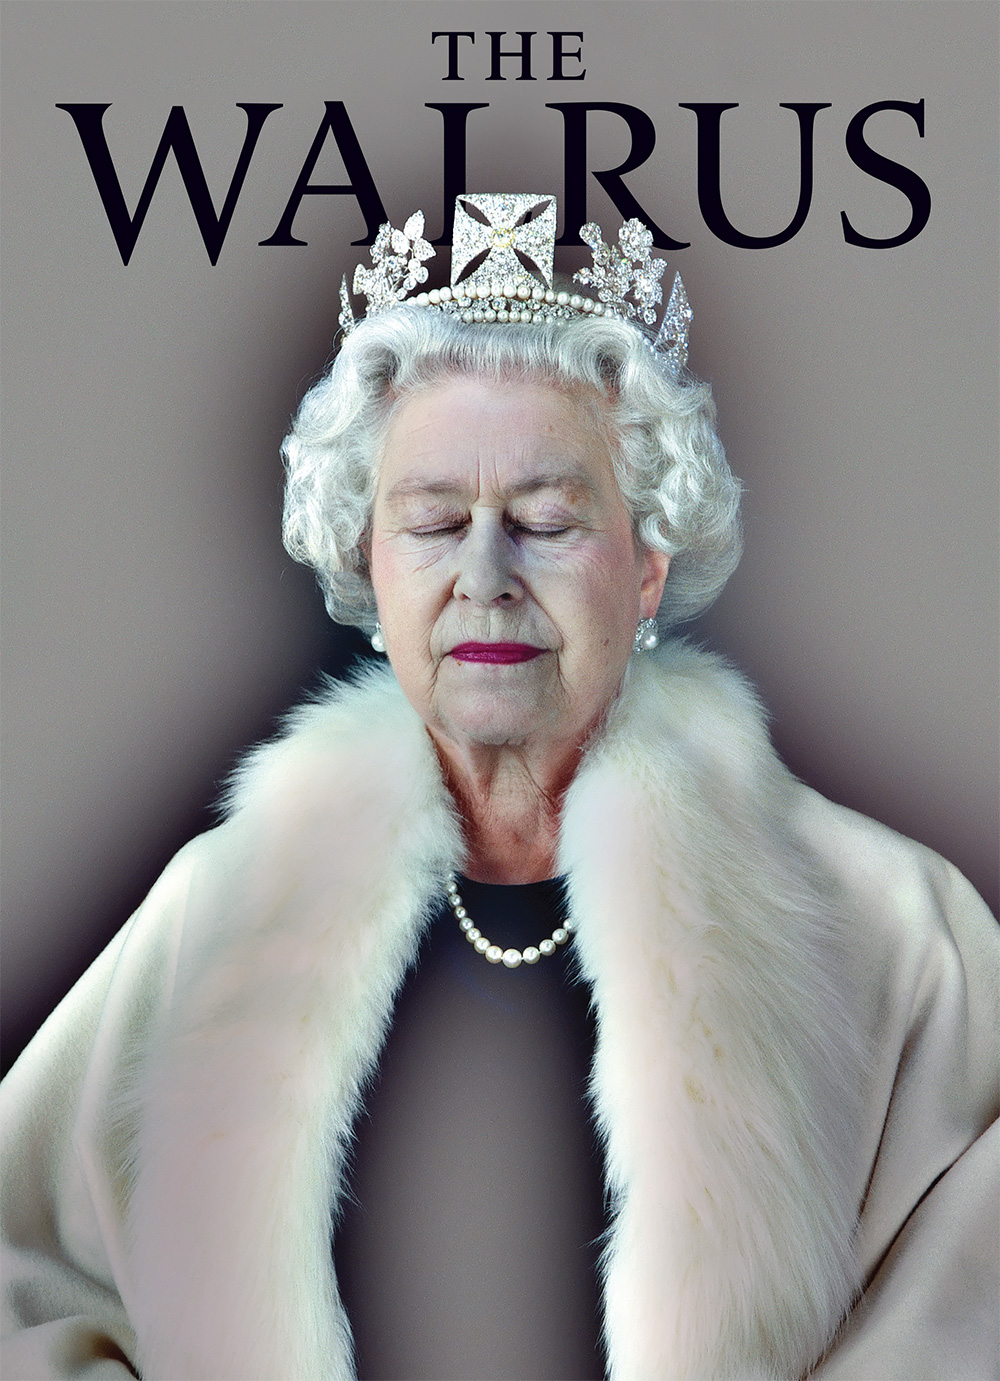 Cover of The Walrus magazine featuring a photo of Queen Elizabeth II with her eyes closed. She is wearing a crown and a coat with a large fur collar in front of a plain grey background. The Walrus wordmark is in black at the top.